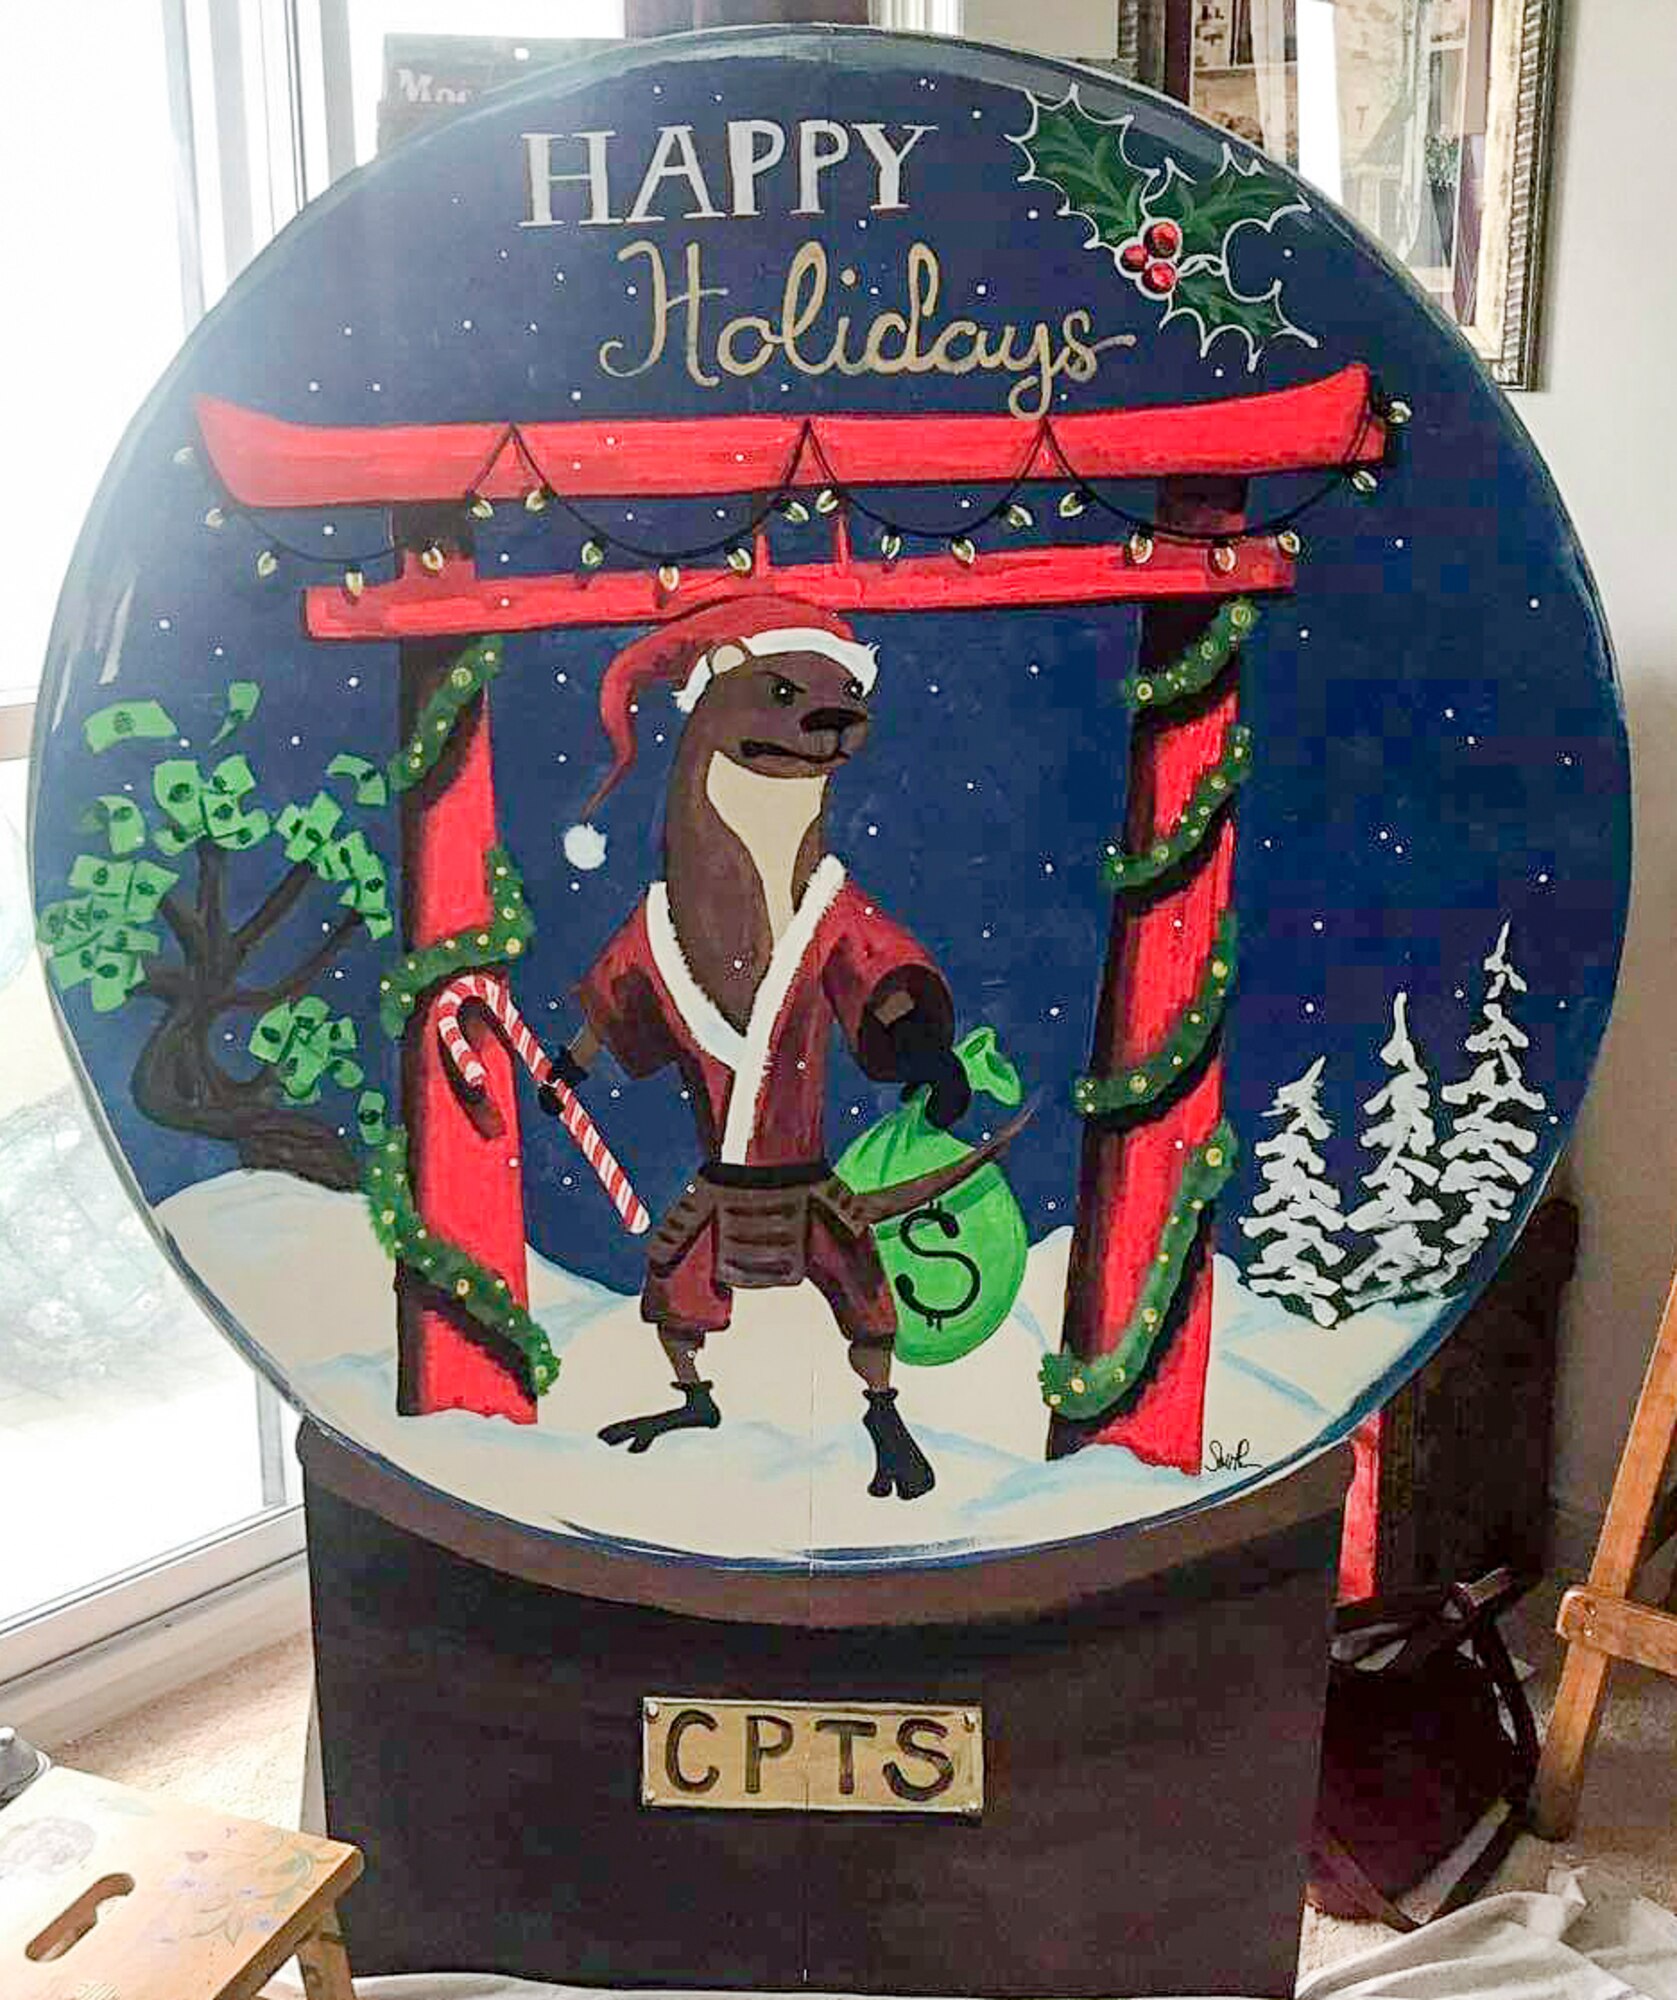 Sharon Smith, the wife of Maj. Brian Smith, a physical therapist with the 35th Medical Operations Squadron, created a Wild Weasel holiday card for the 35th Comptroller Squadron at Misawa Air Base, Japan, in 2018. (Courtesy photo by Sharon Smith)